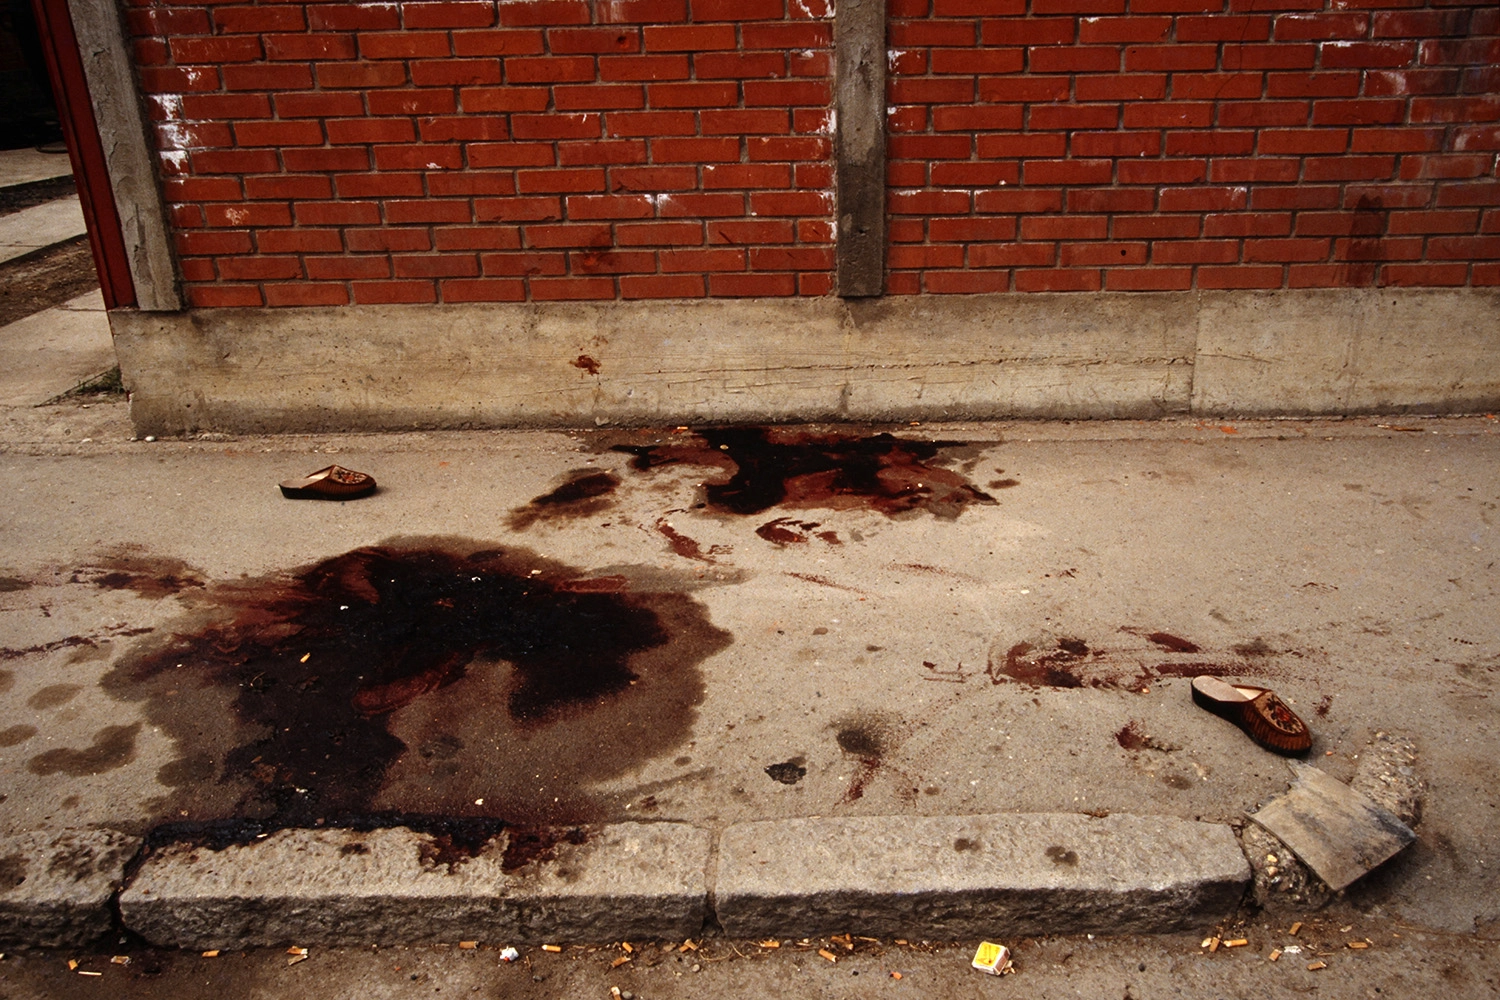 Blood stains from civilians gunned down in Bijeljina on April 2, 1992.